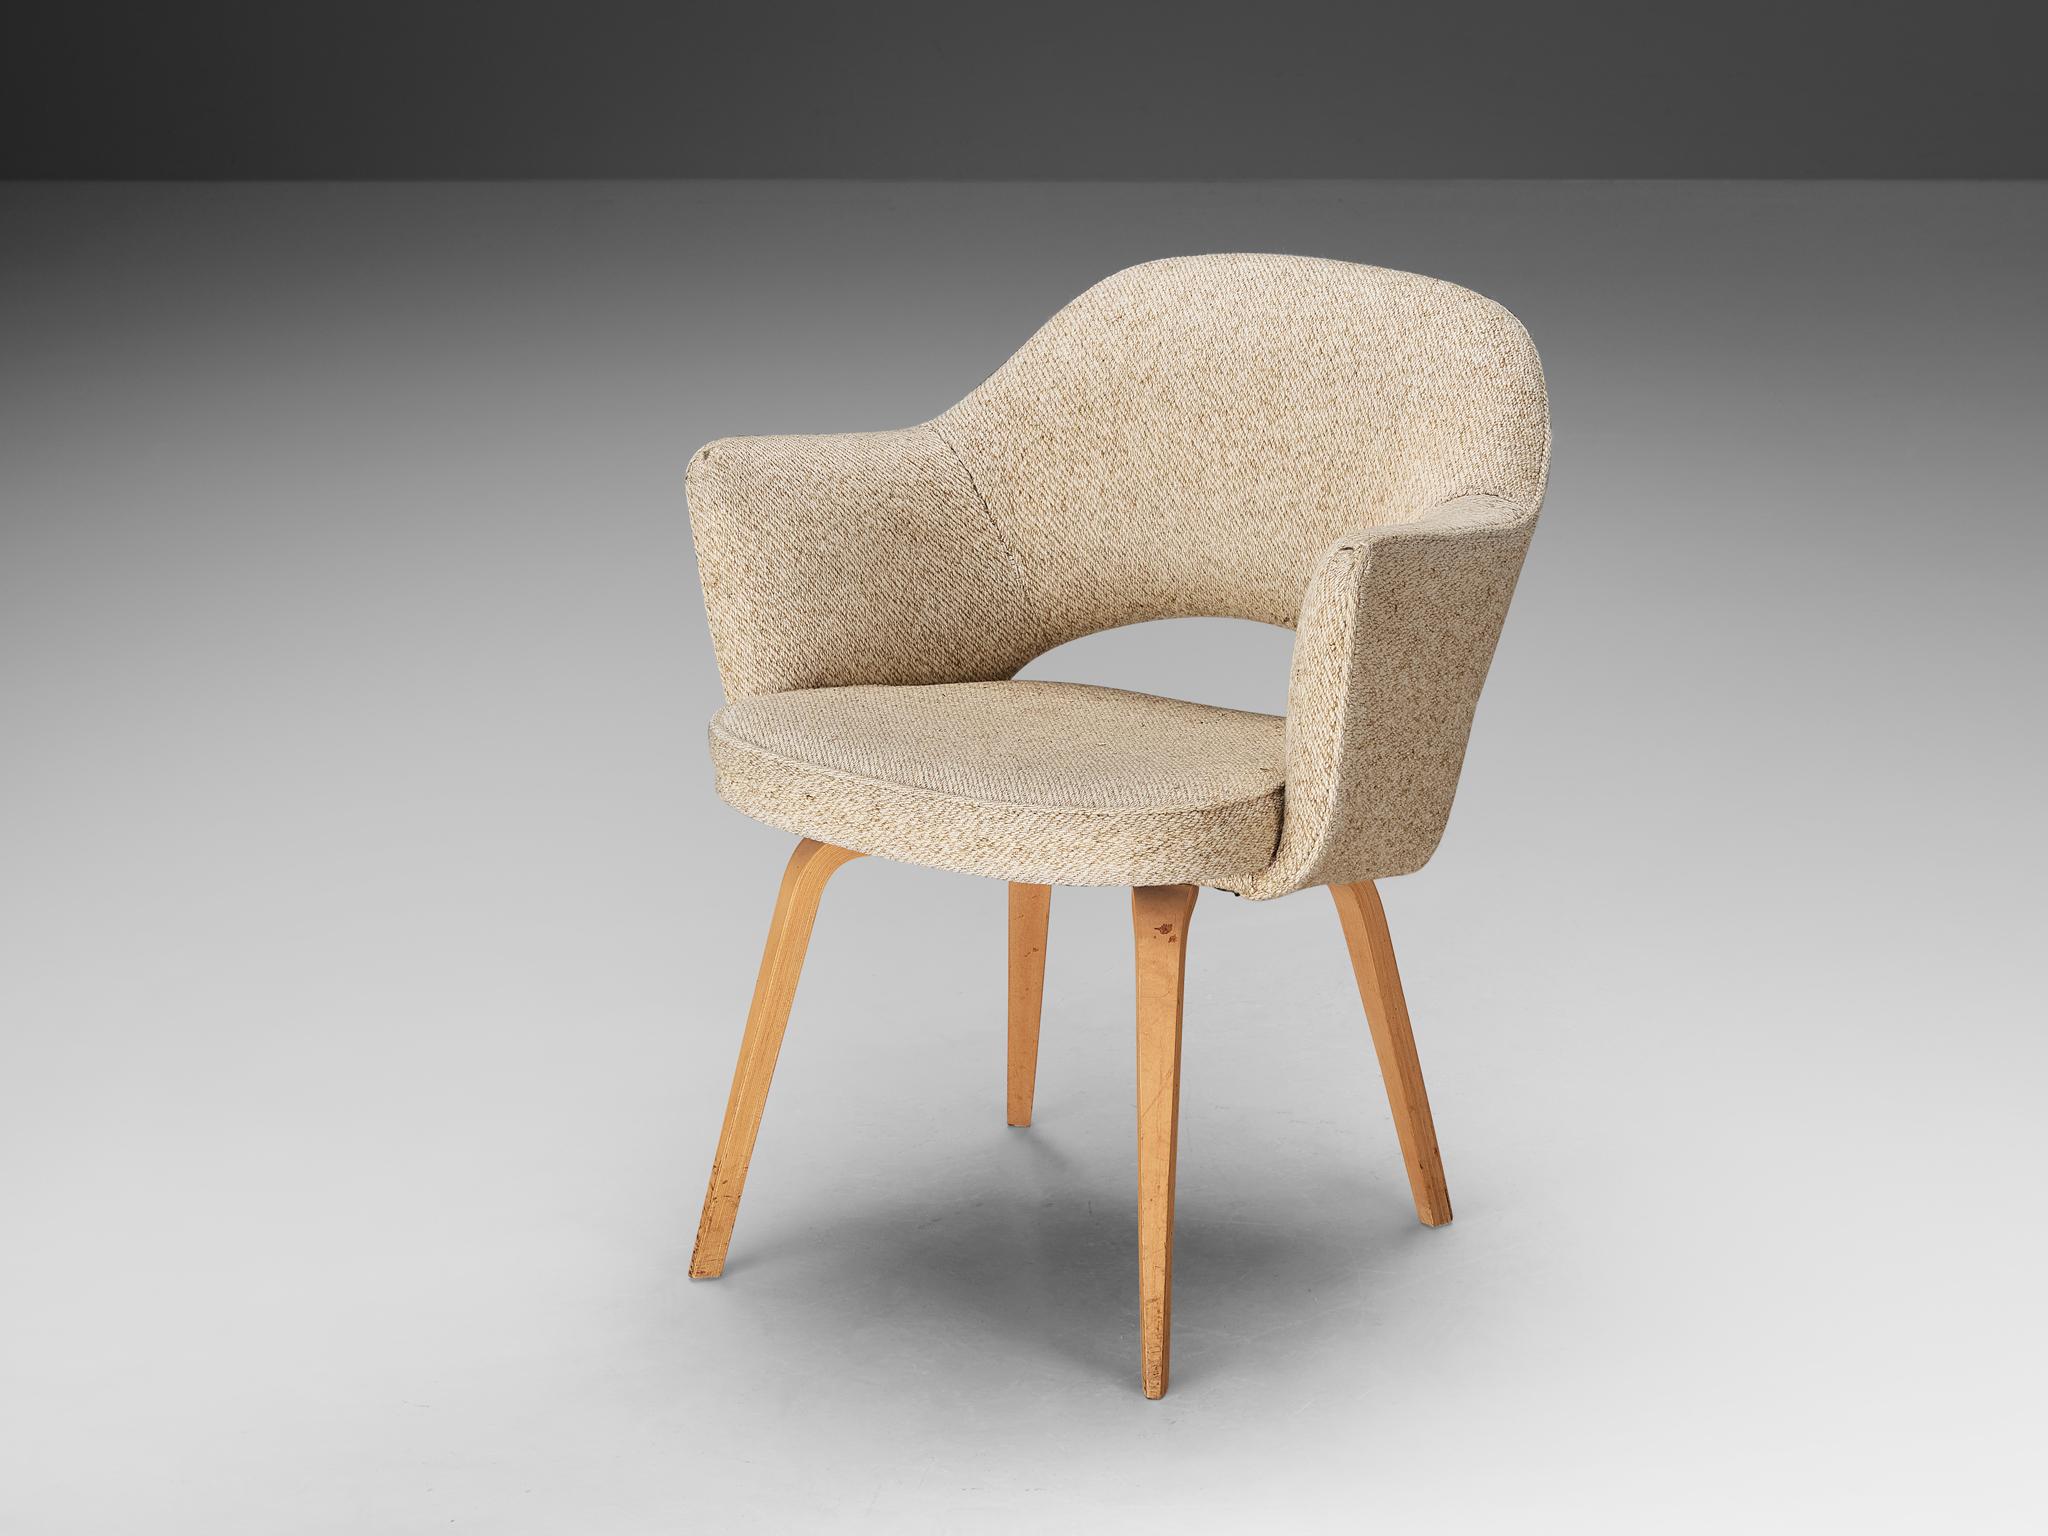 Eero Saarinen for Knoll International, armchair, oak, fabric, United States, design 1948, later production

An organic shaped armchair designed by Eero Saarinen. A fluid, sculptural form. This timeless and versatile design continues to fit